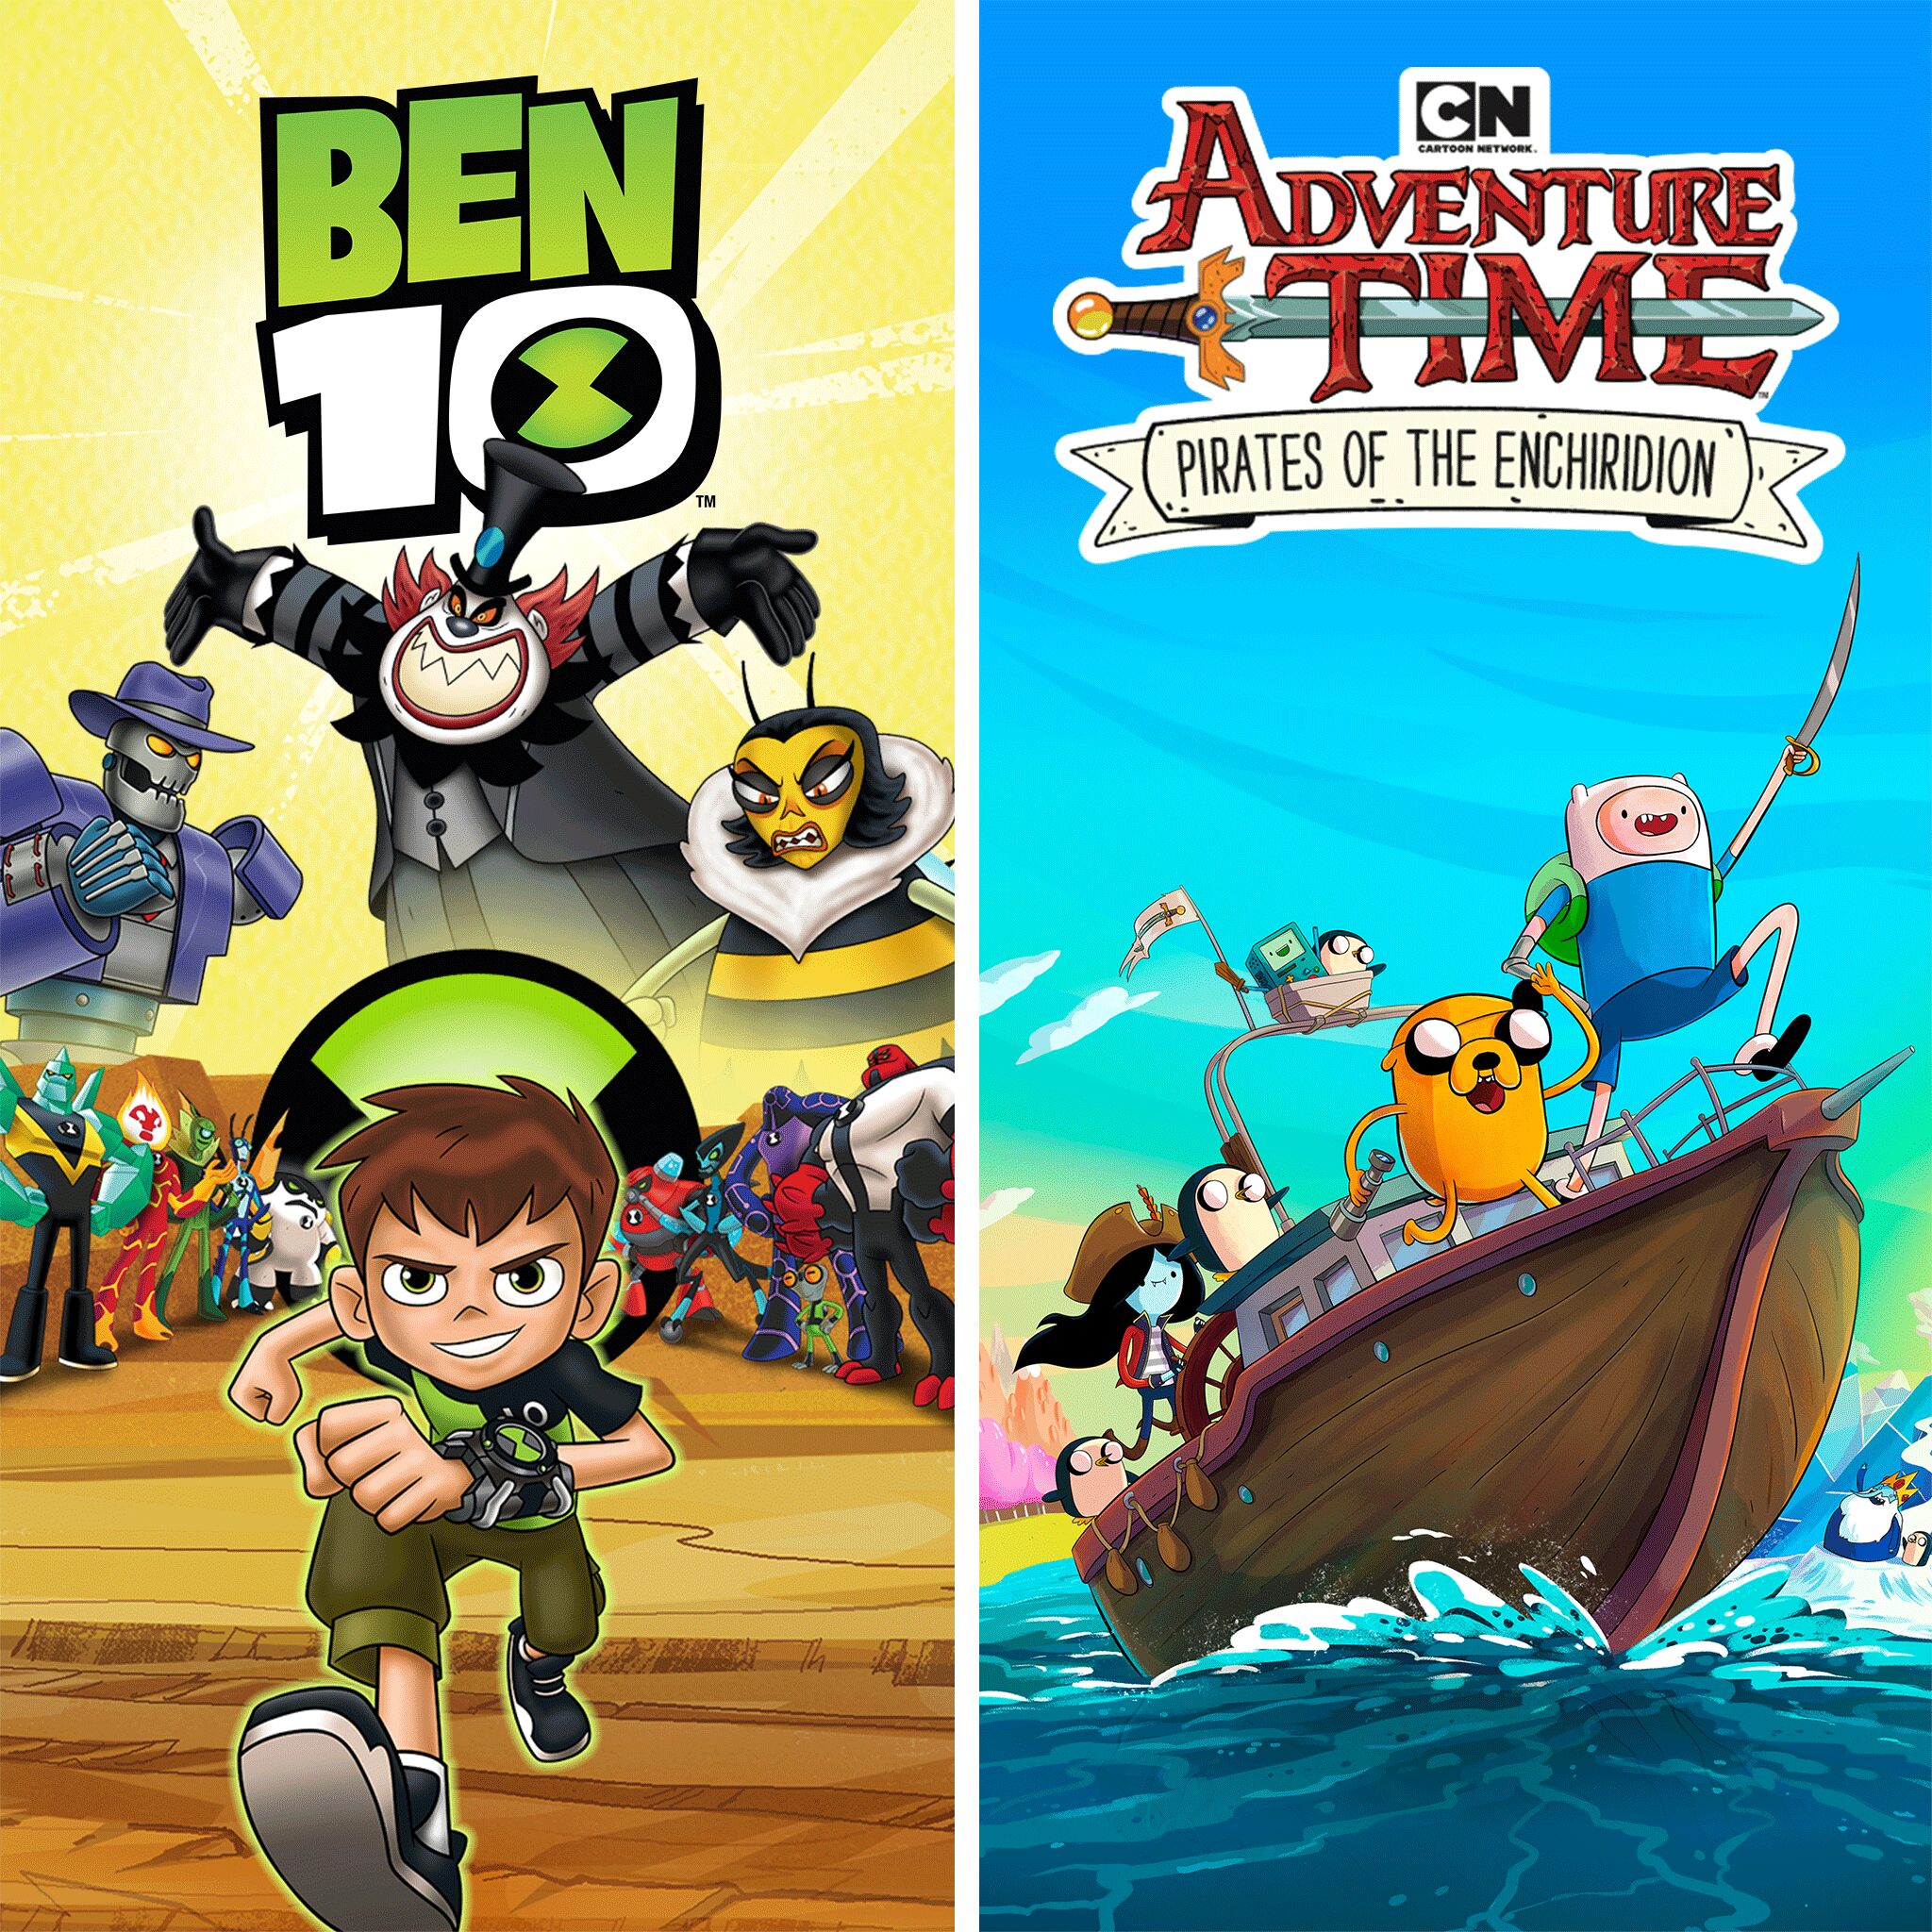 Ben 10 and Adventure Time